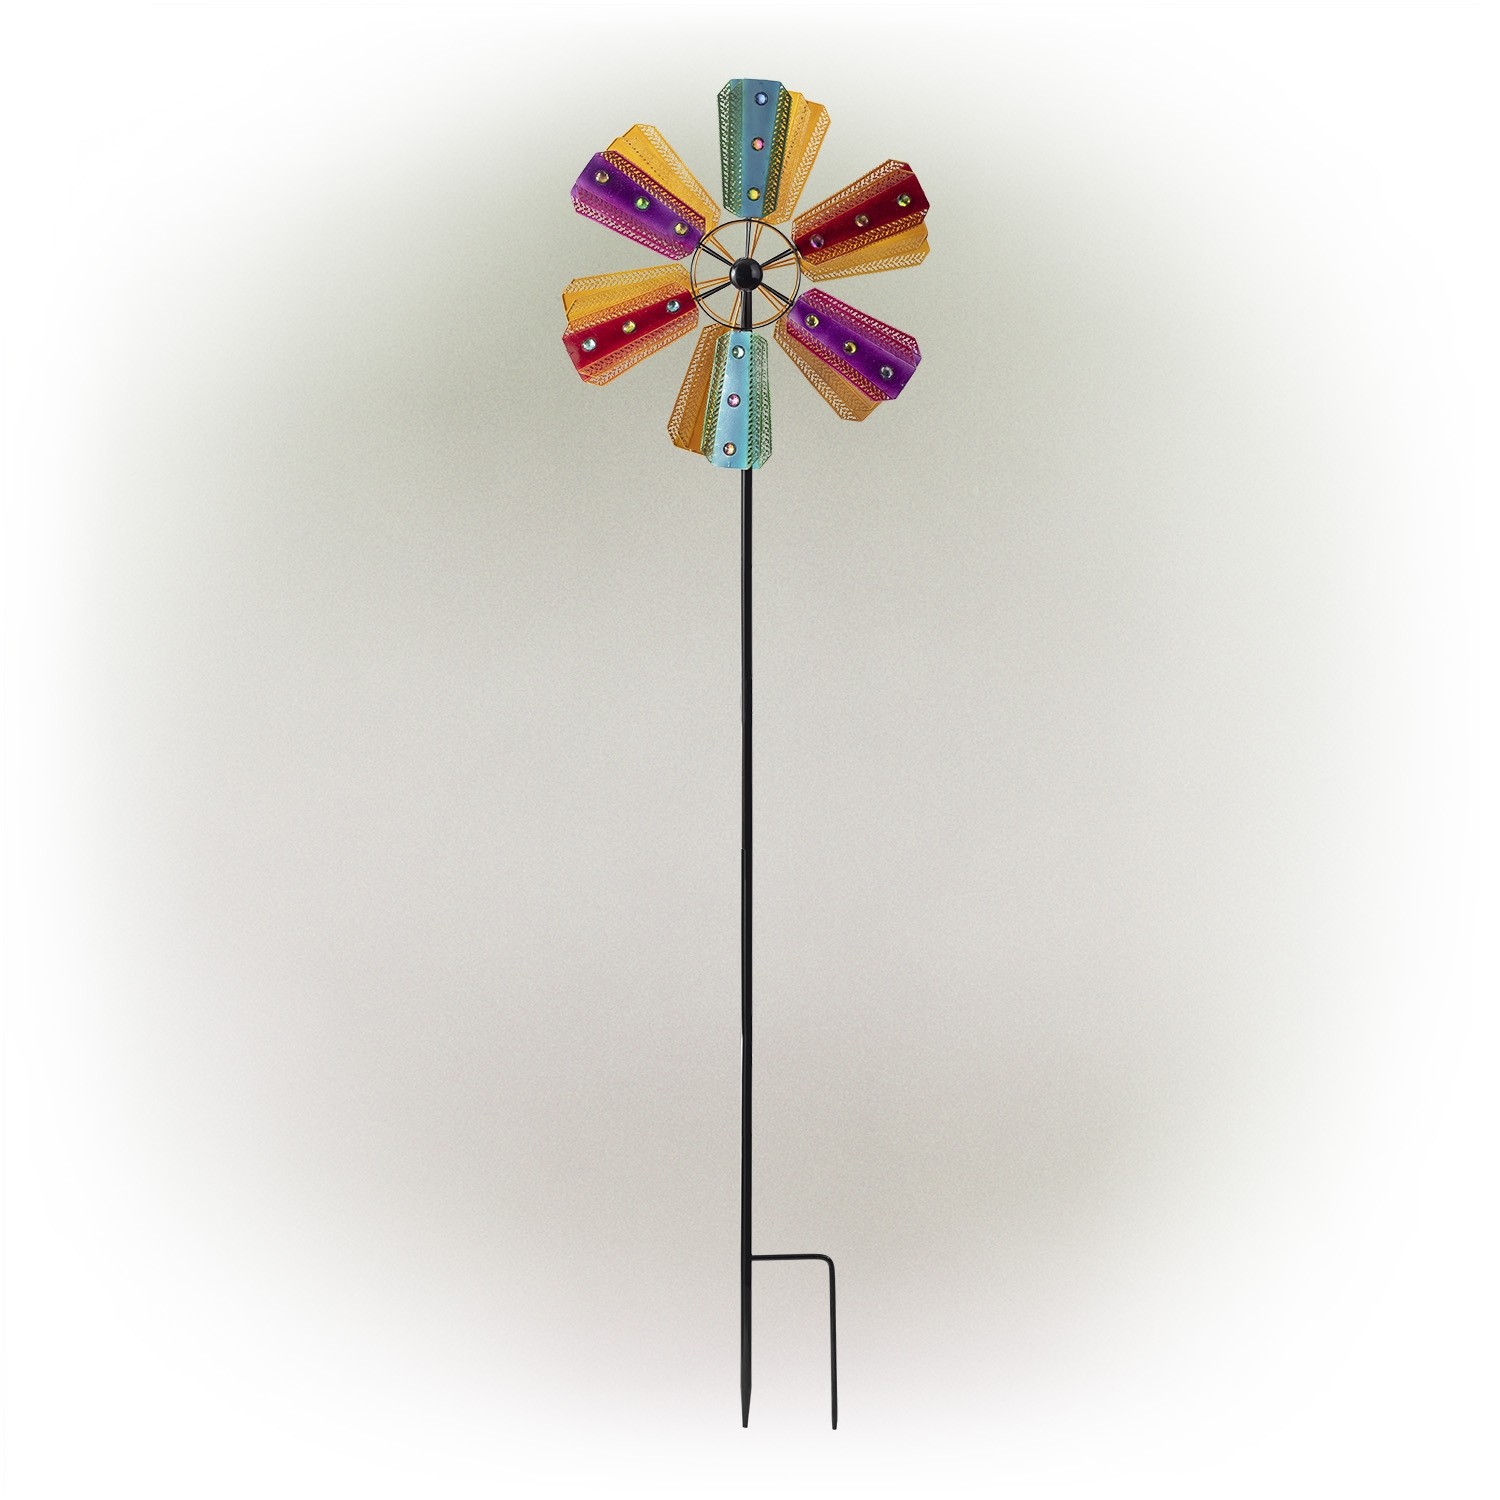 86" COLORFUL BEJEWELED WINDMILL SPINNER GARDEN STAKE 